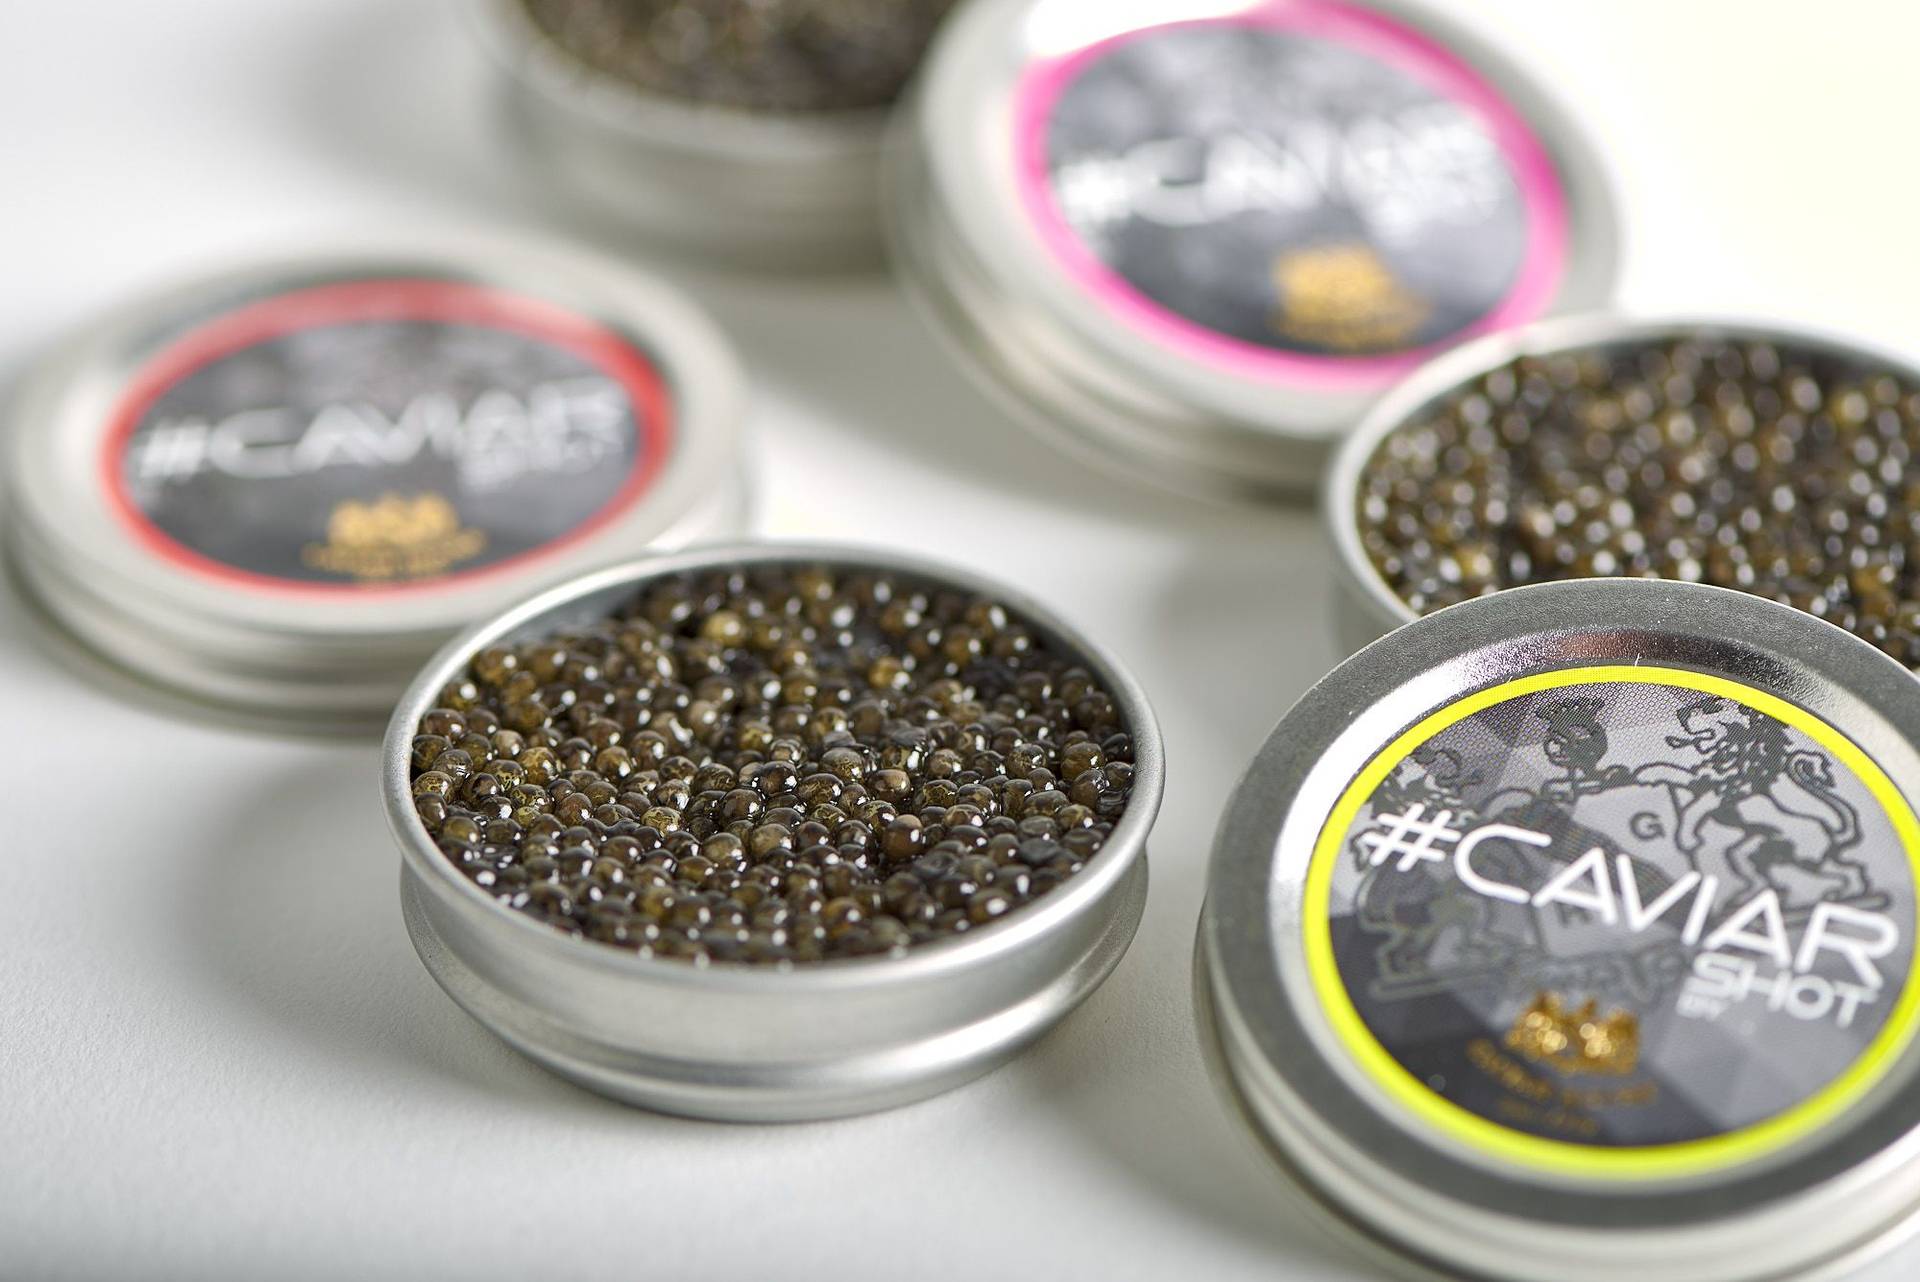 caviarshot from caviar house and prunier on white background